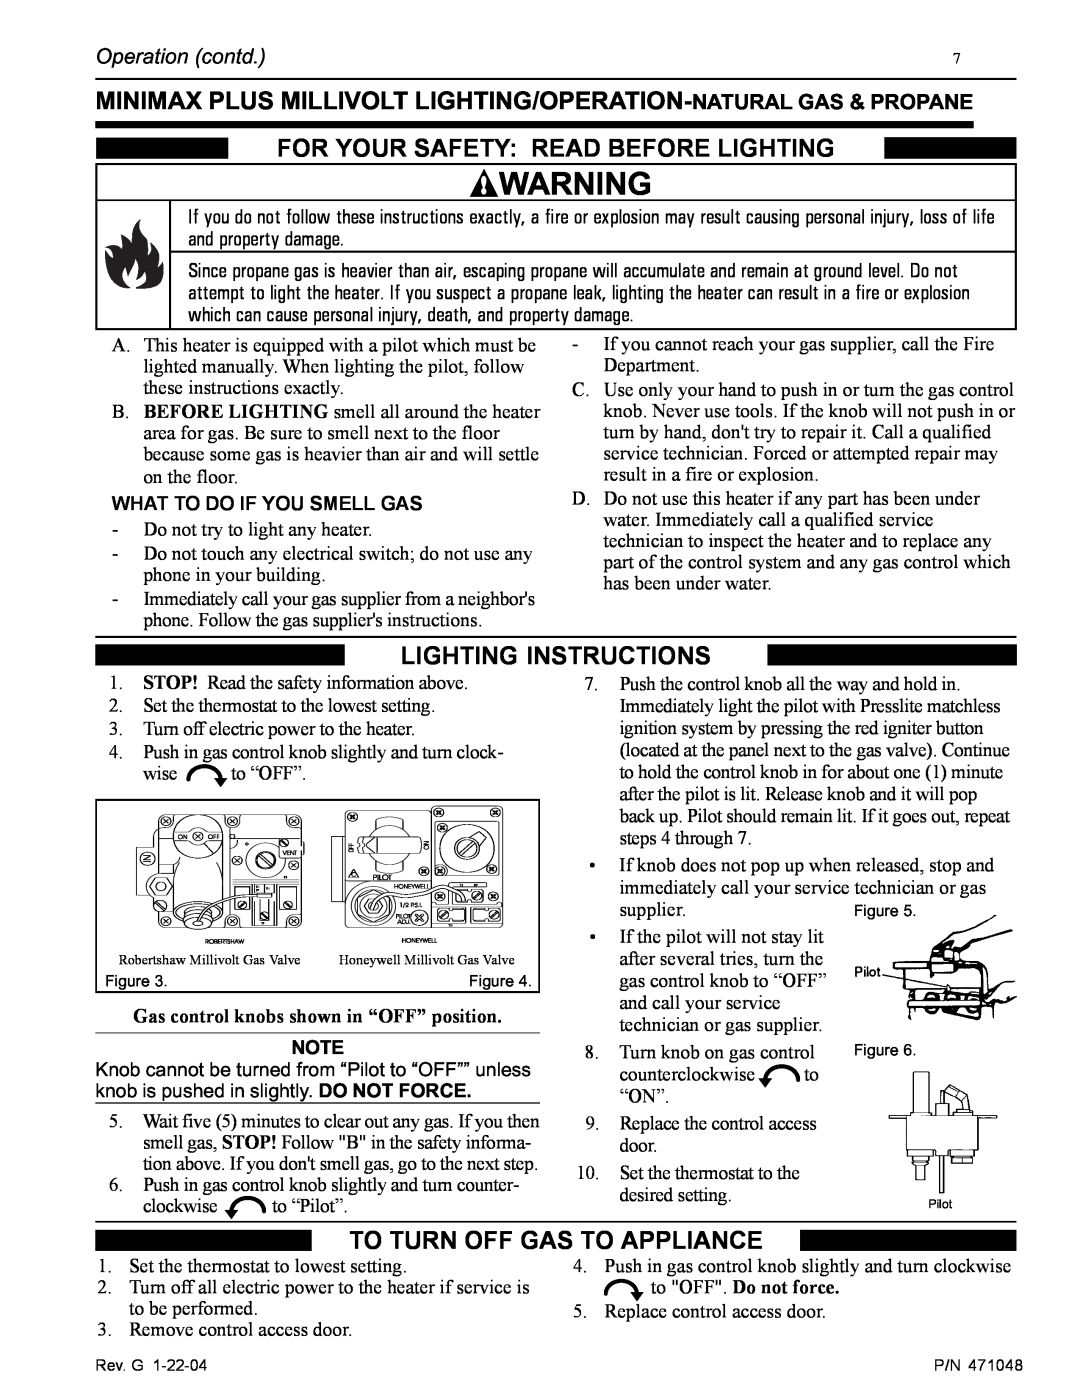 Pentair MiniMax Plus HP Series Lighting Instructions, For Your Safety Read Before Lighting, To Turn Off Gas To Appliance 